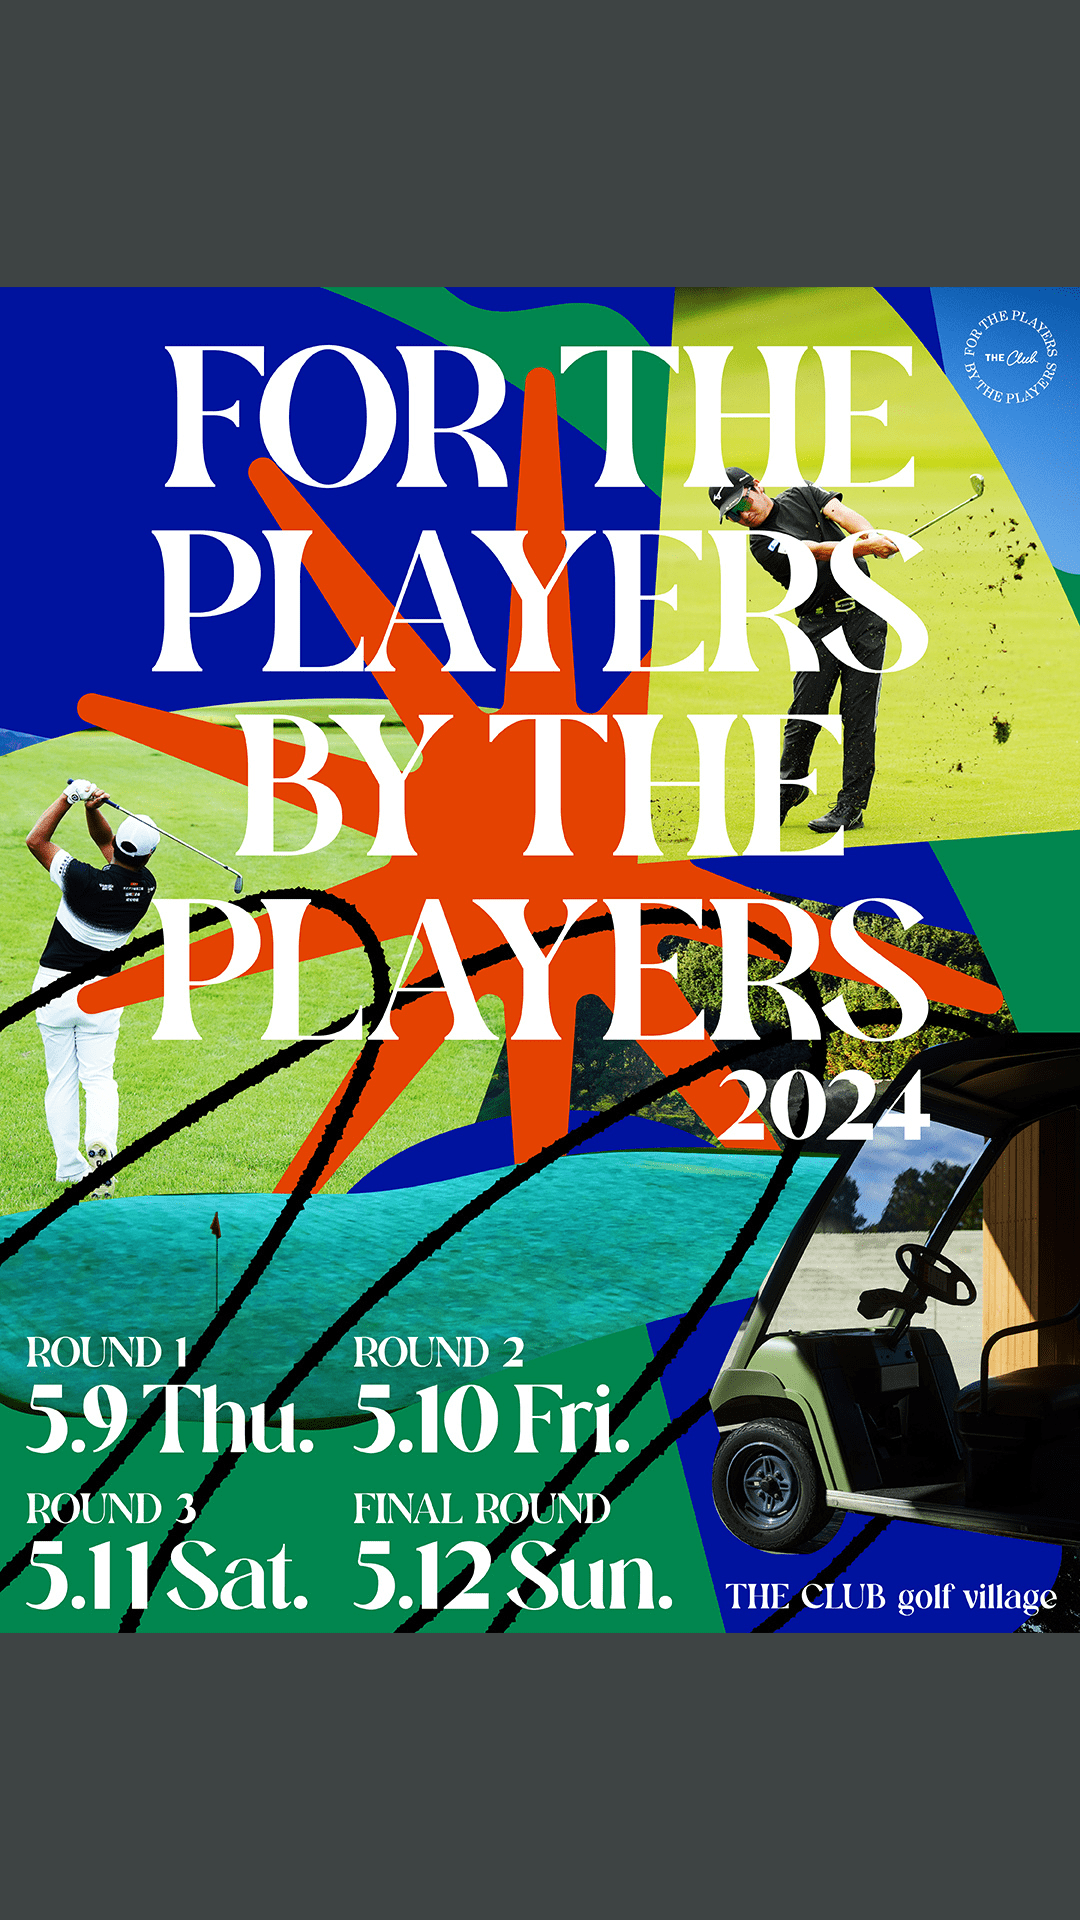 「For The Players By The Players」大会日程